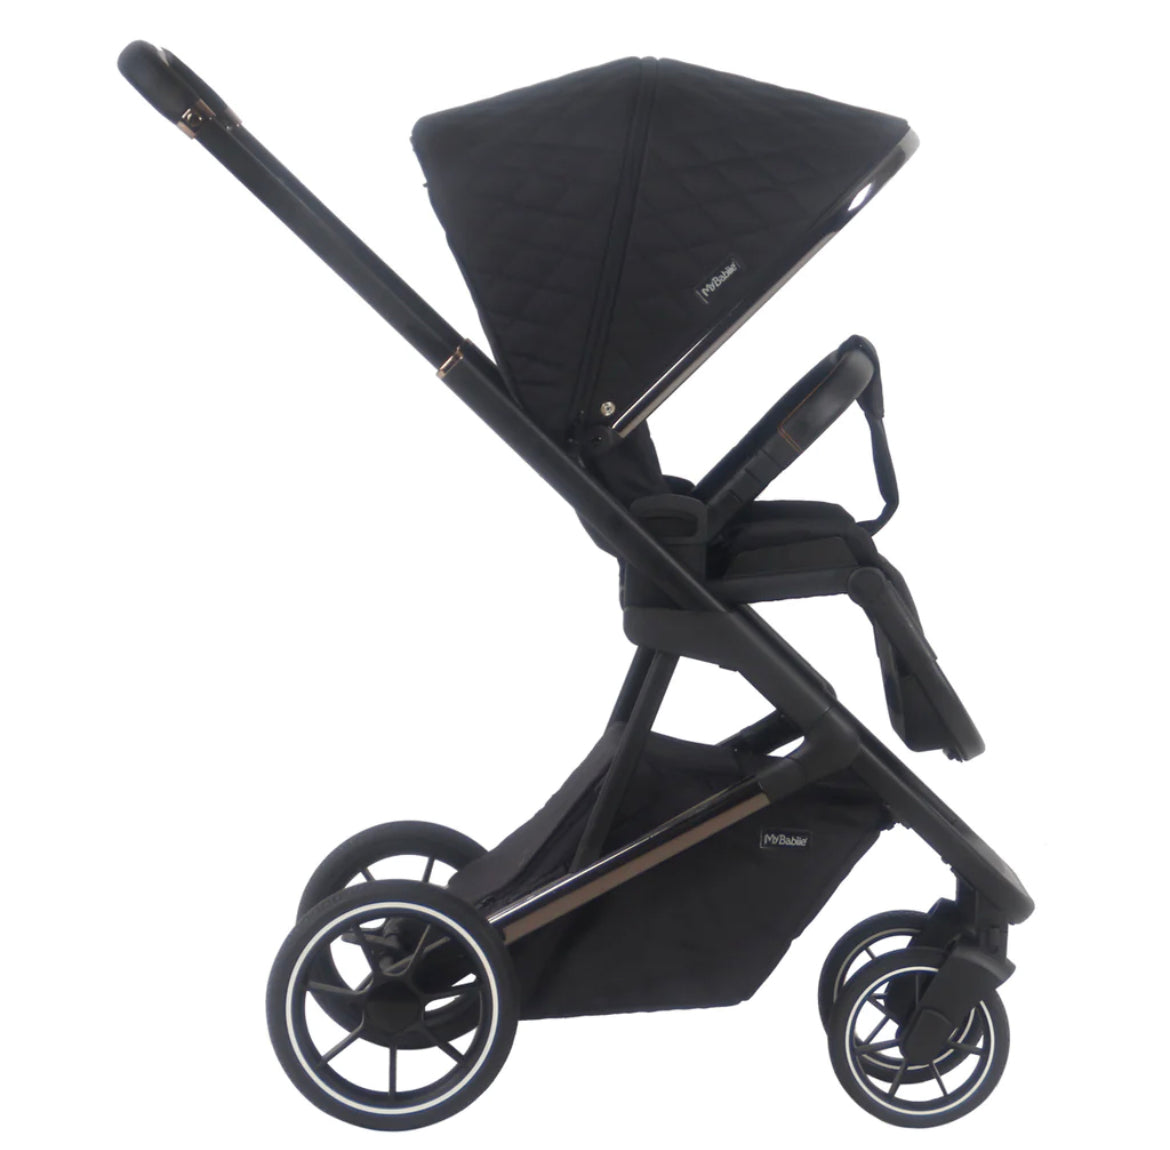 MB500i 3-in-1 Travel System with i-Size Car Seat - Billie Faiers Midnight Gunmetal